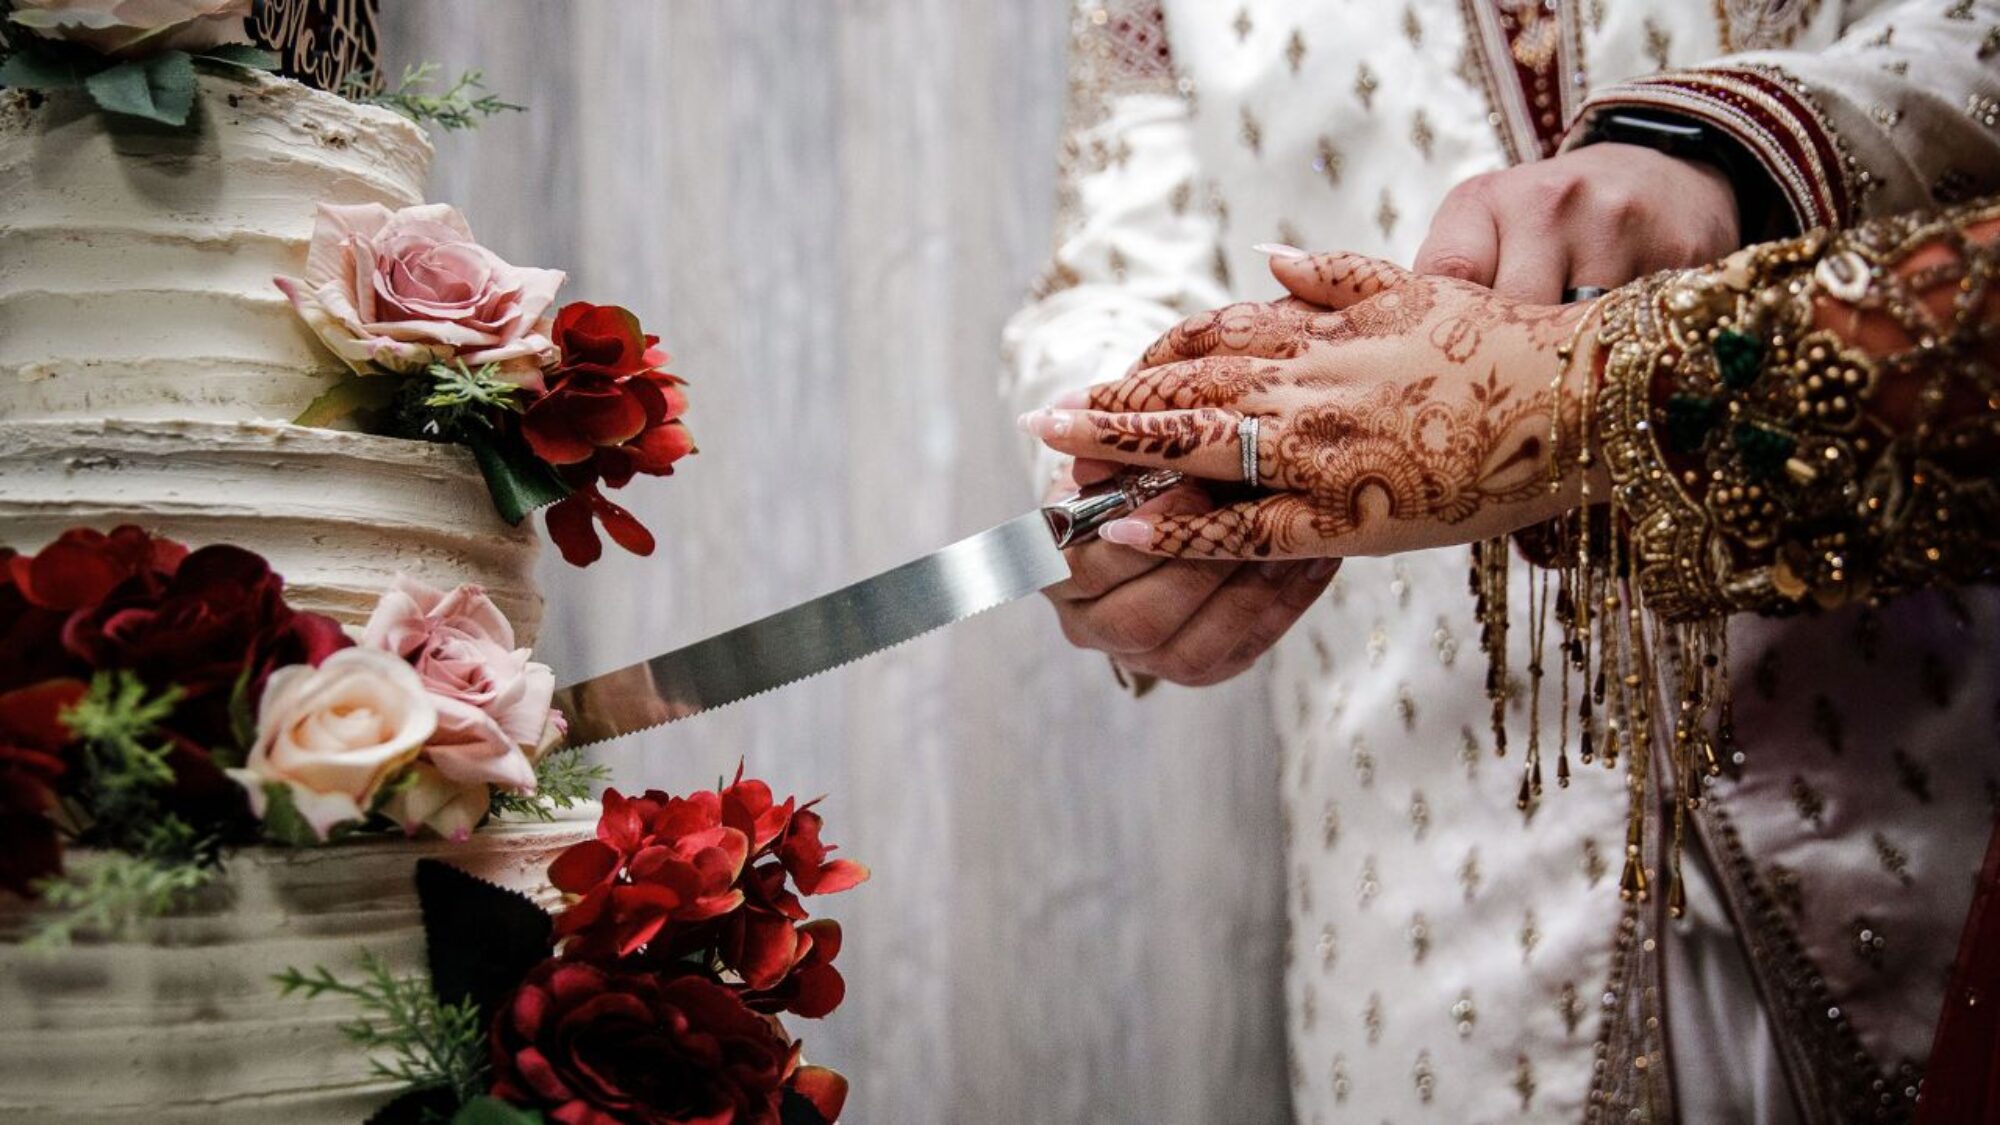 A couple on their wedding day cutting their cake, showing henna painted hands